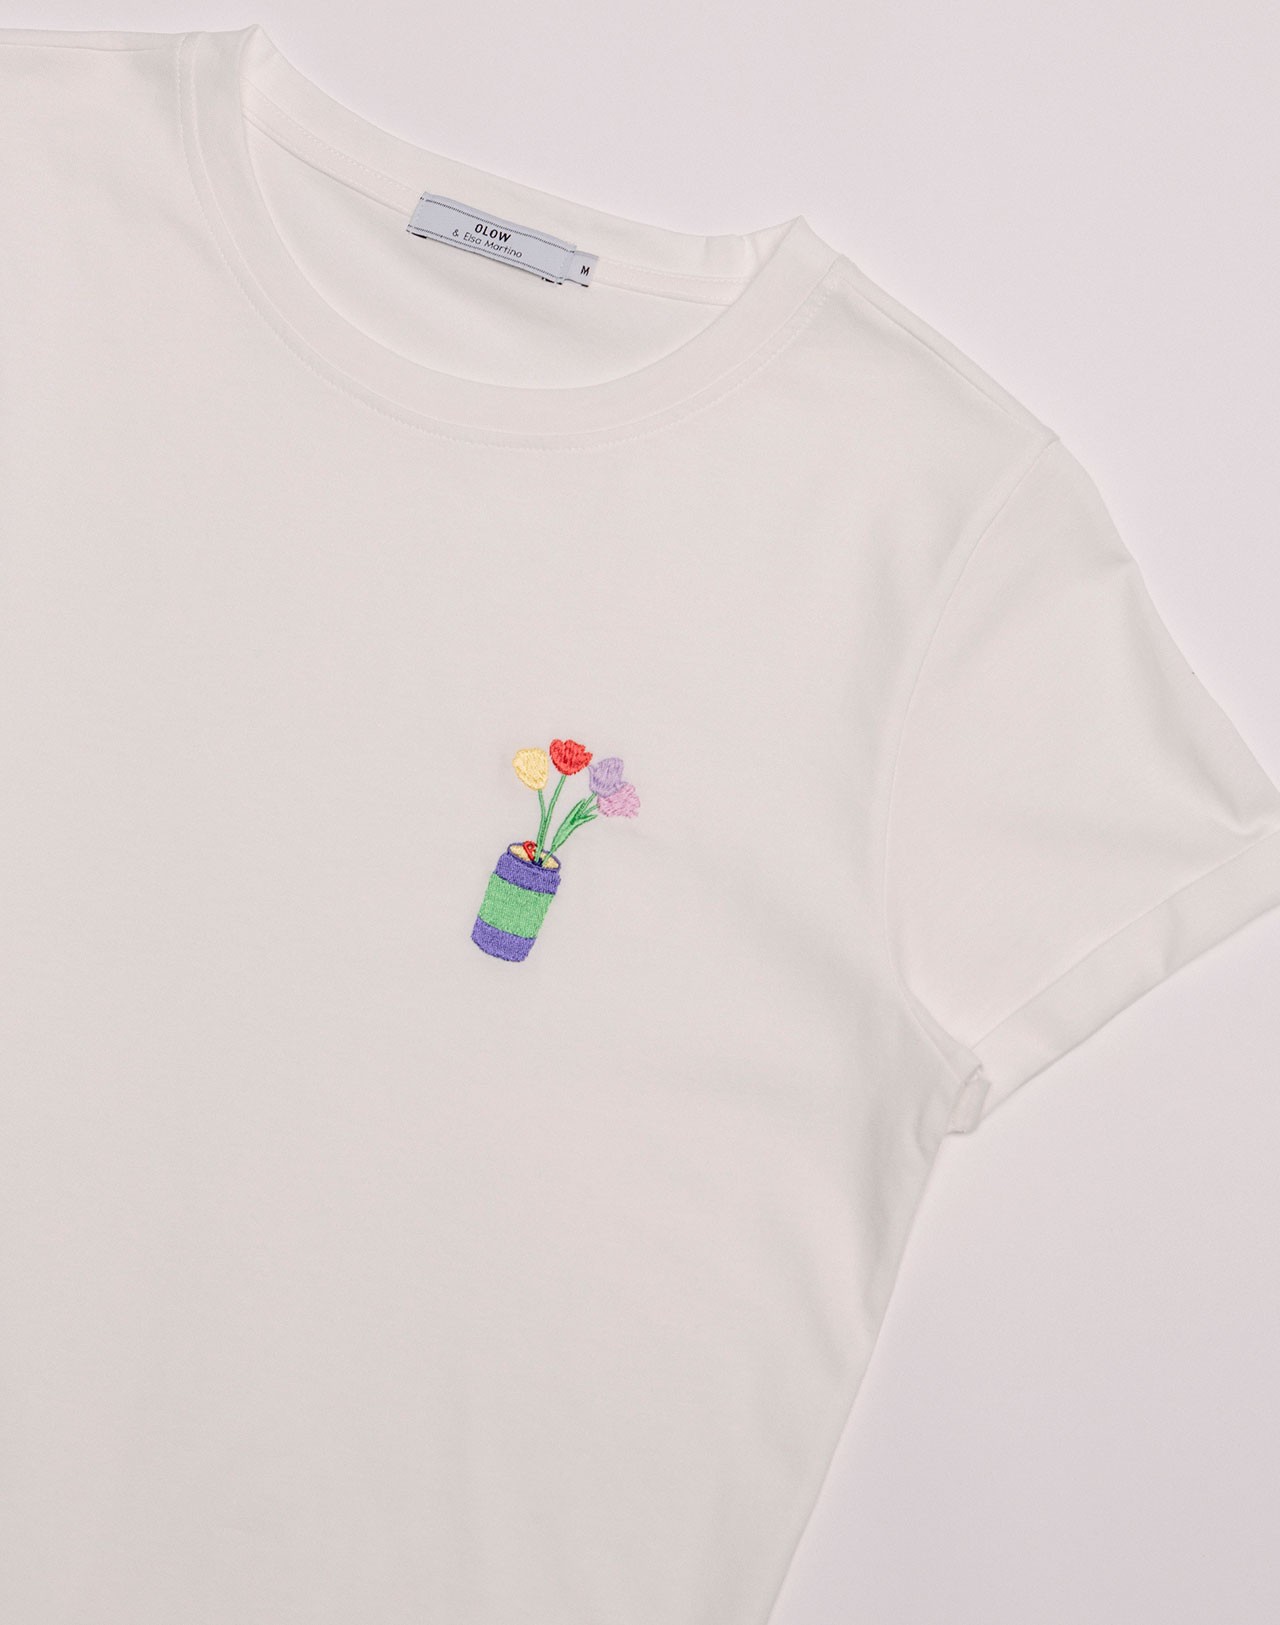 Canette Tee Shirt